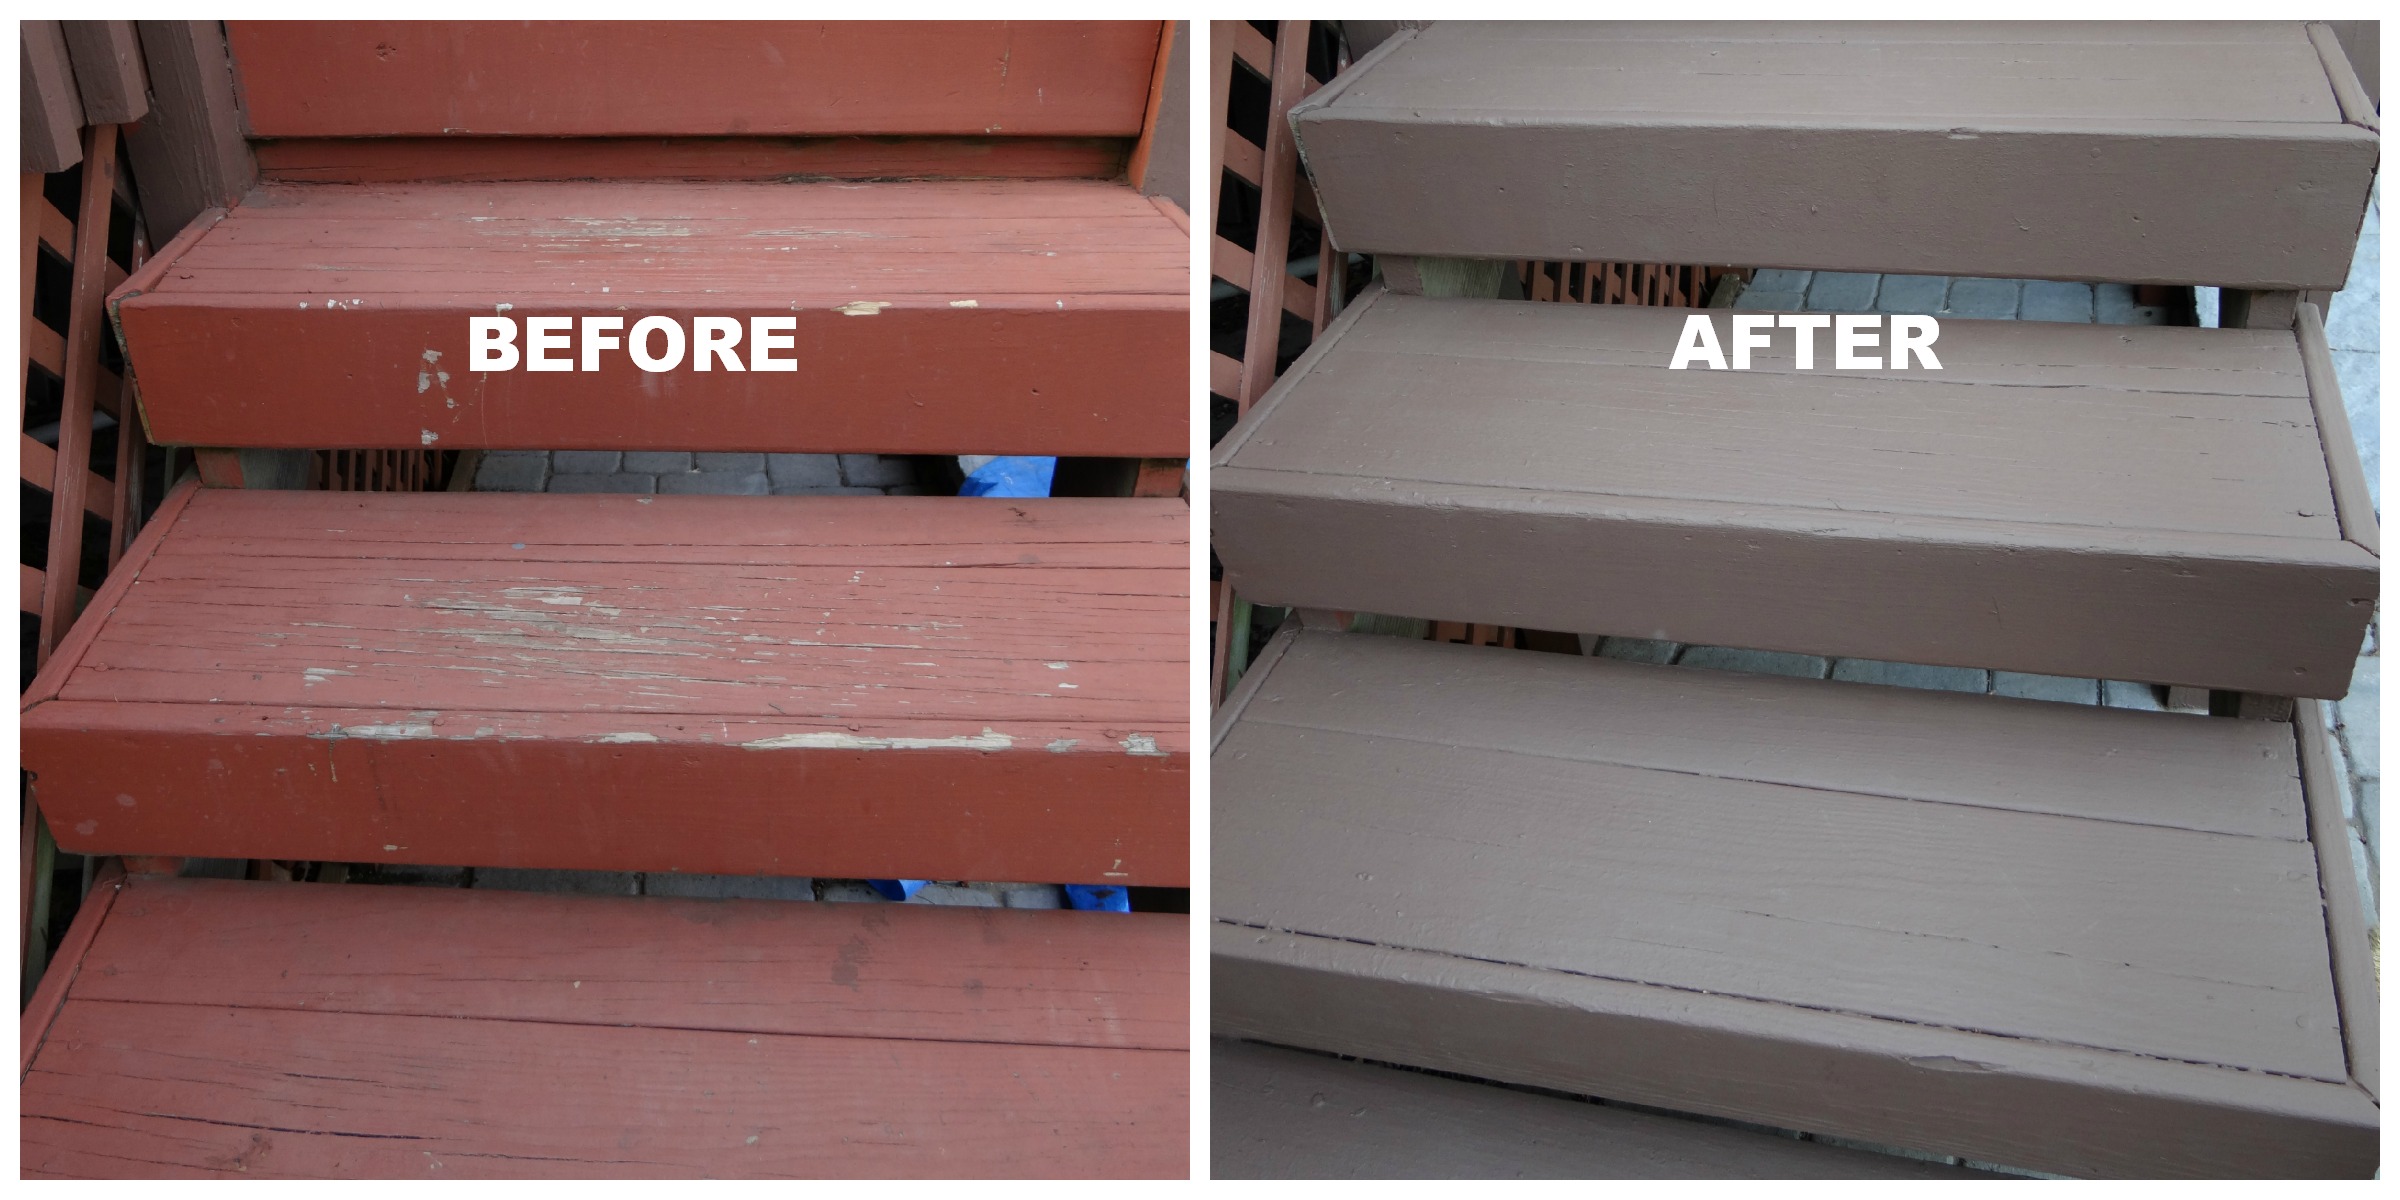 Behr’s Deck Over paint is a good buy! The color we chose is Padre 